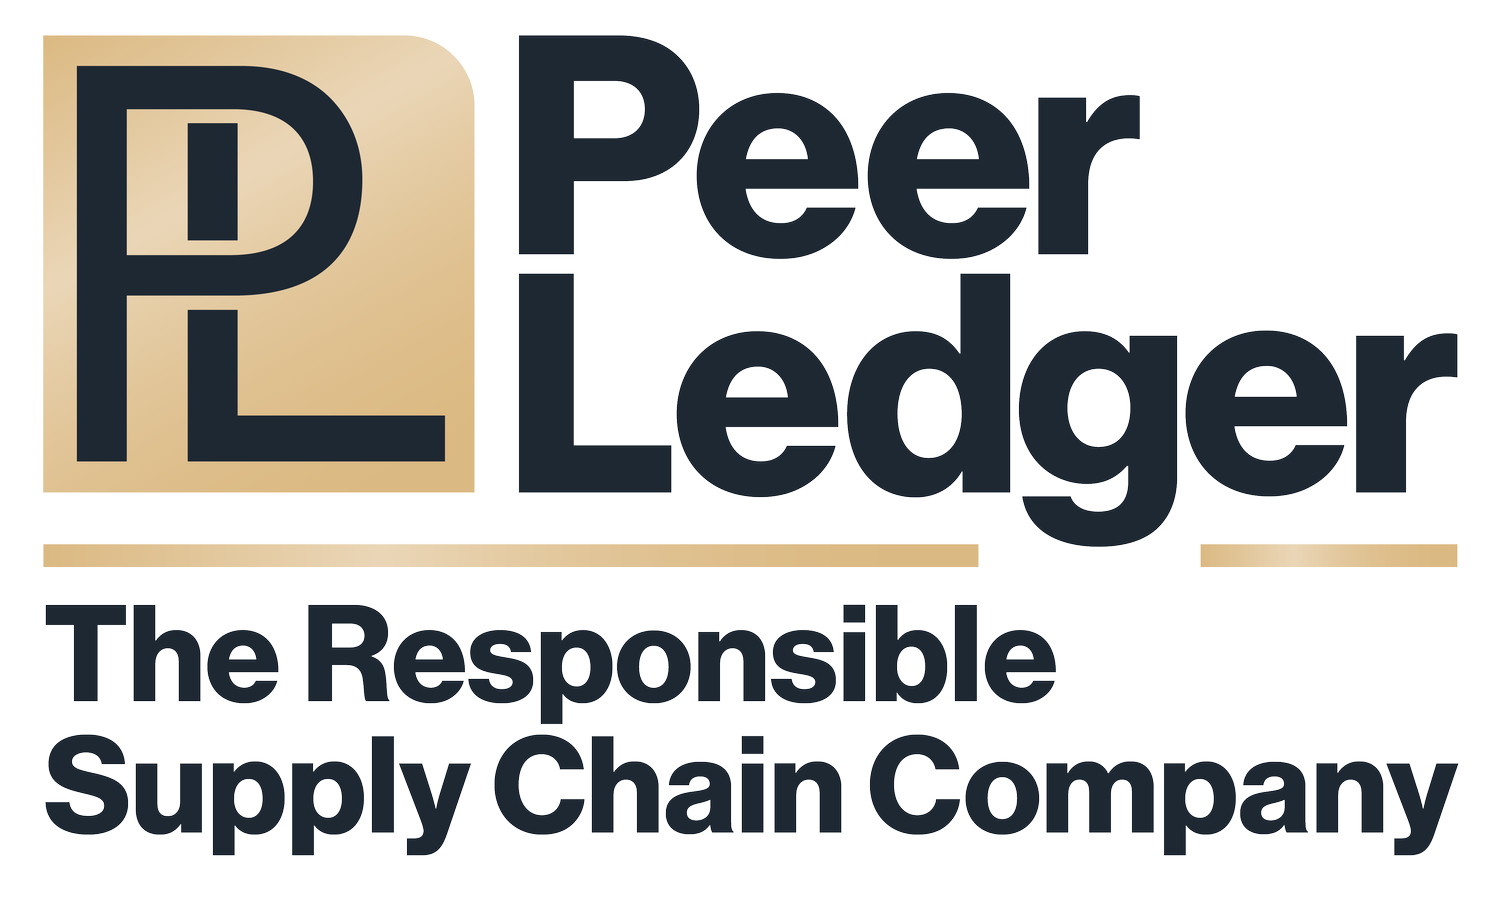 Peer Ledger - The Responsible Supply Chain Company